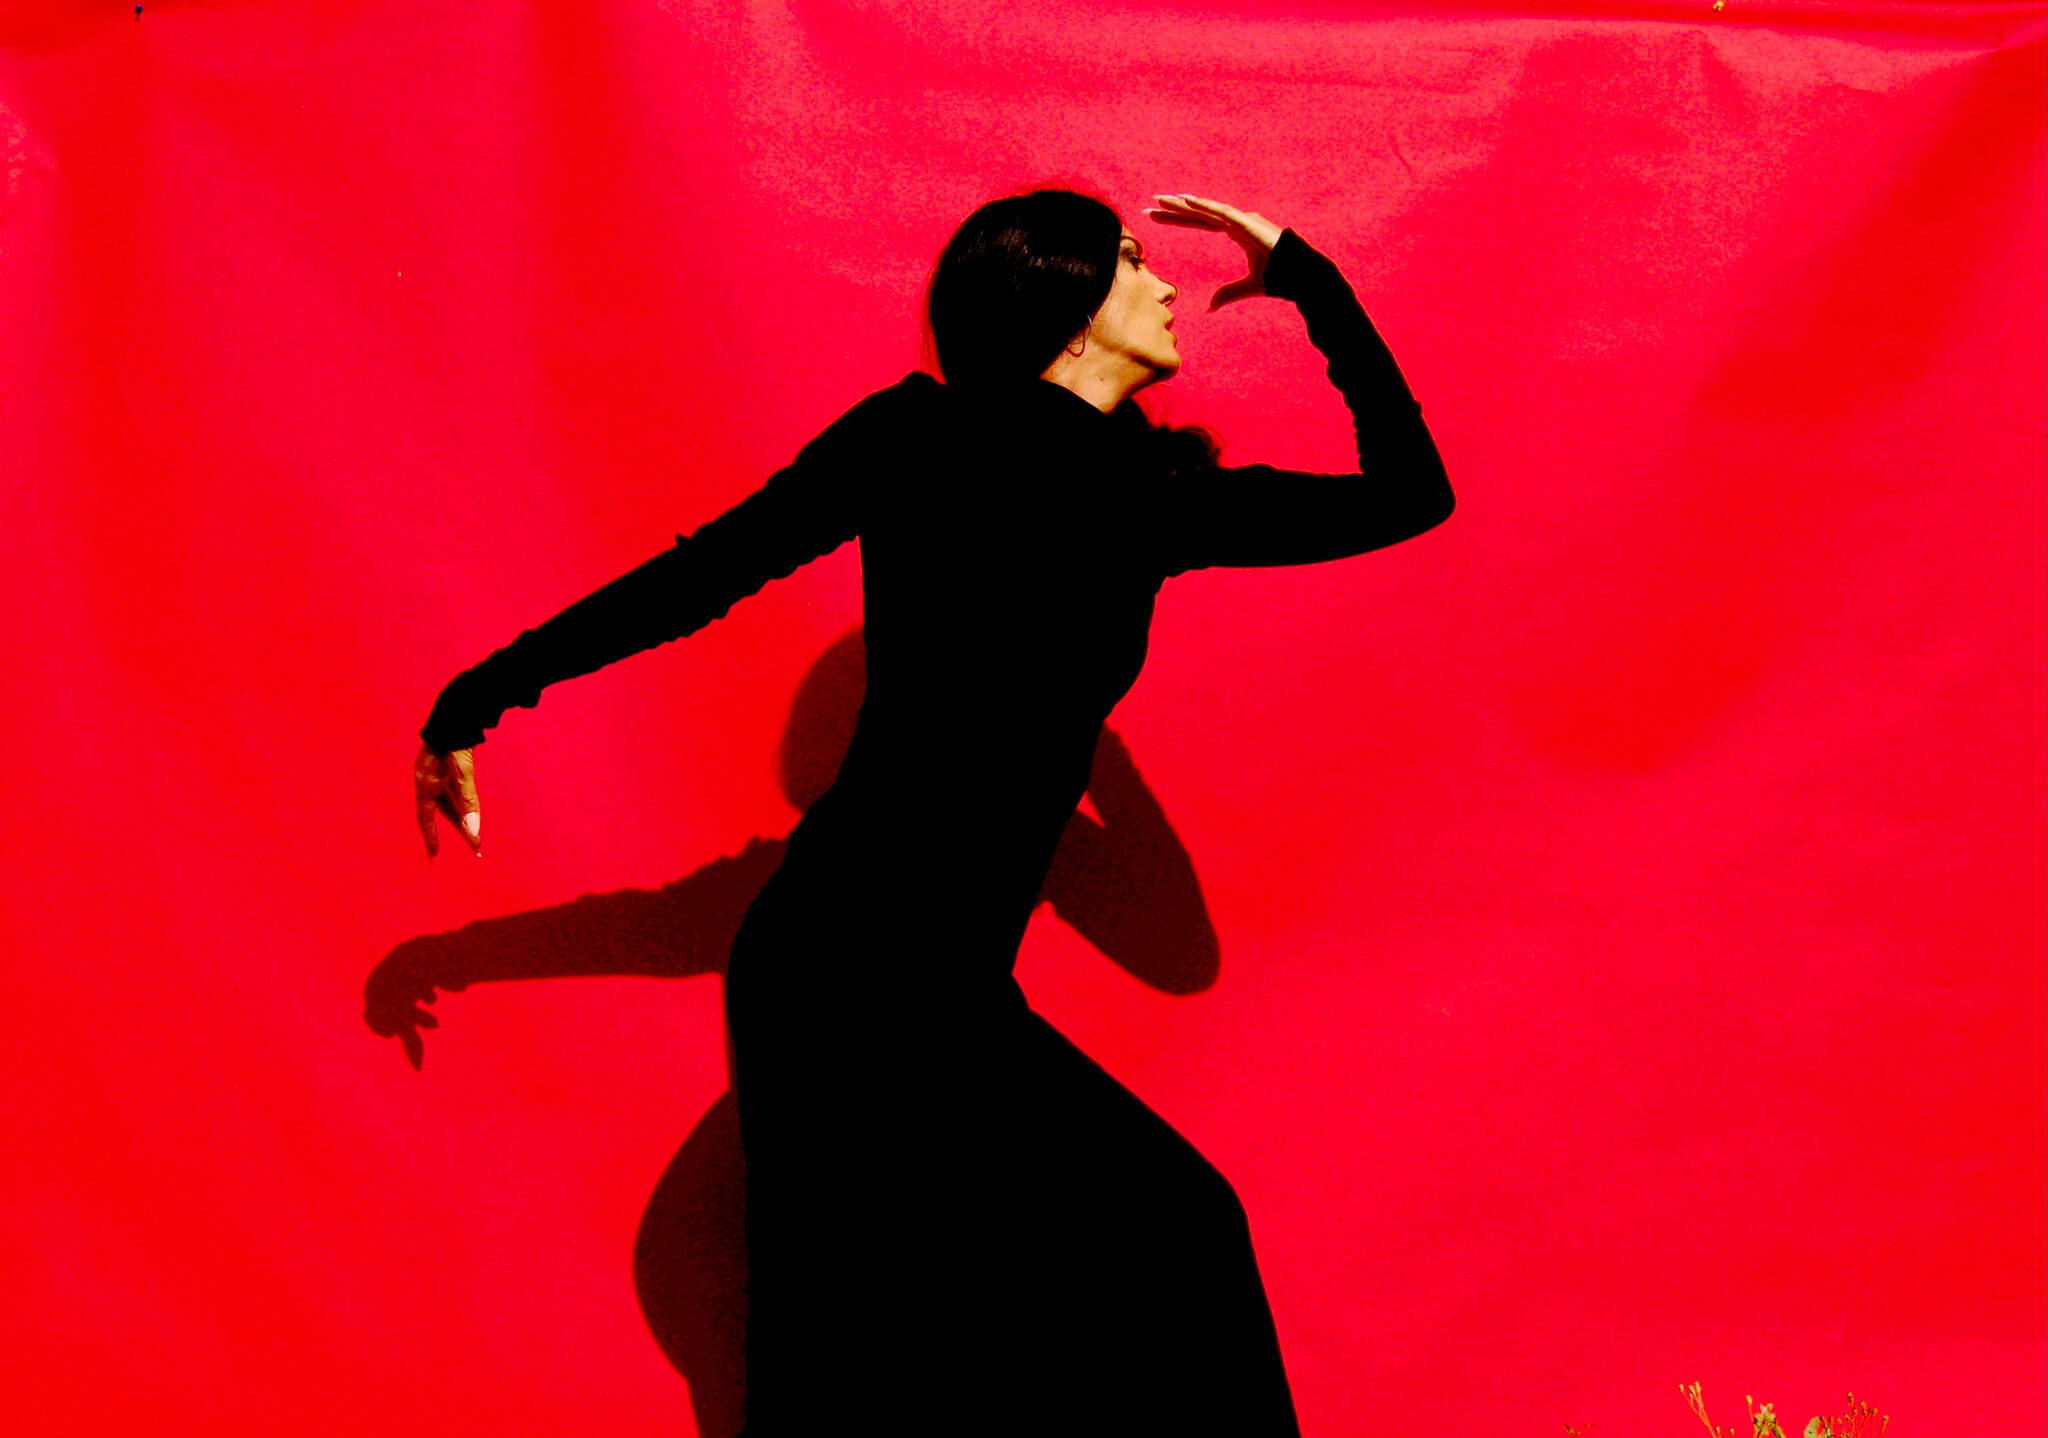 Photo provided
Savannah Fuentes is one of the premier Flamenco dancers in the Pacific Northwest.